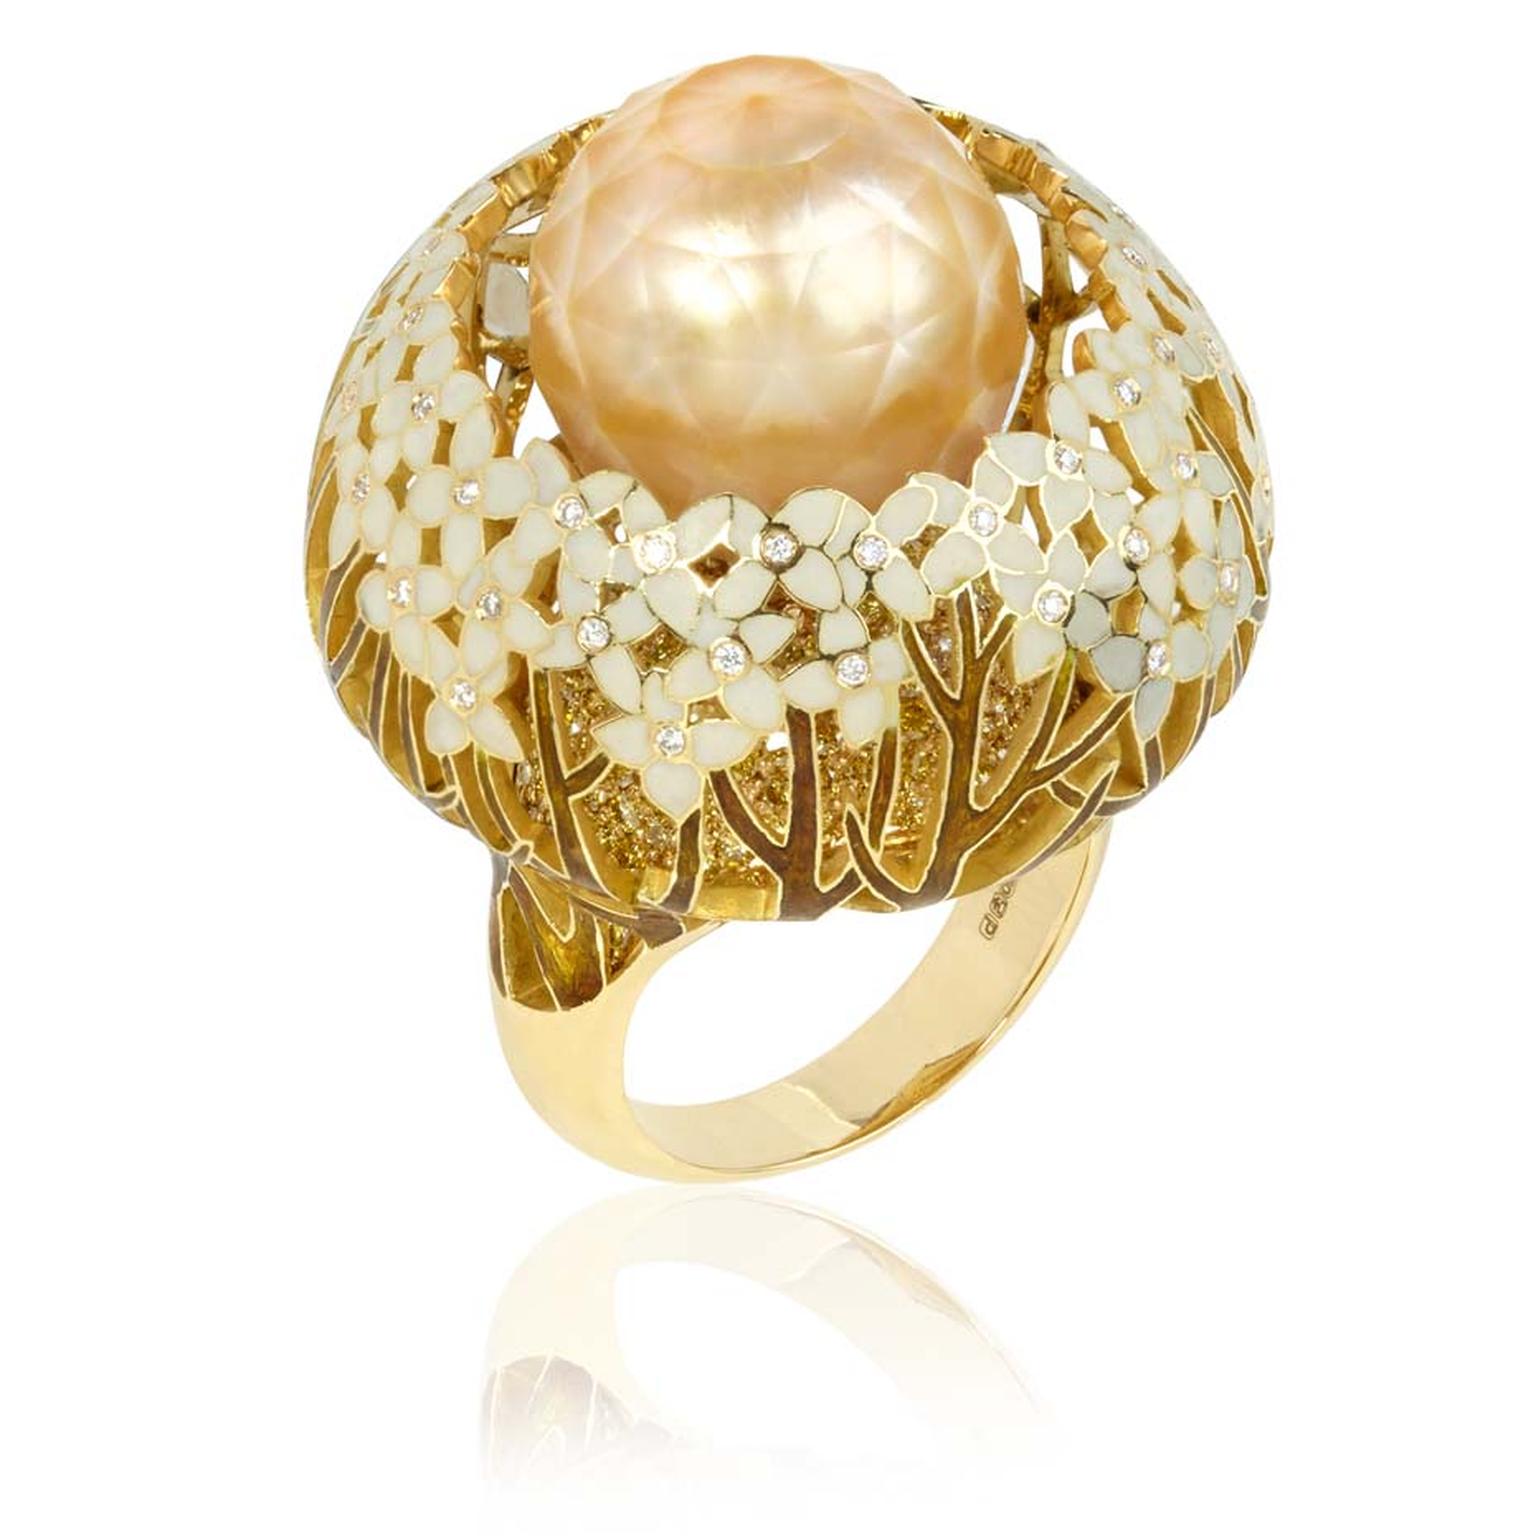 Ilgiz for Annoushka Hortensia gold ring featuring enamelled flowers with yellow and white diamonds surrounding a faceted pearl (£28,500).